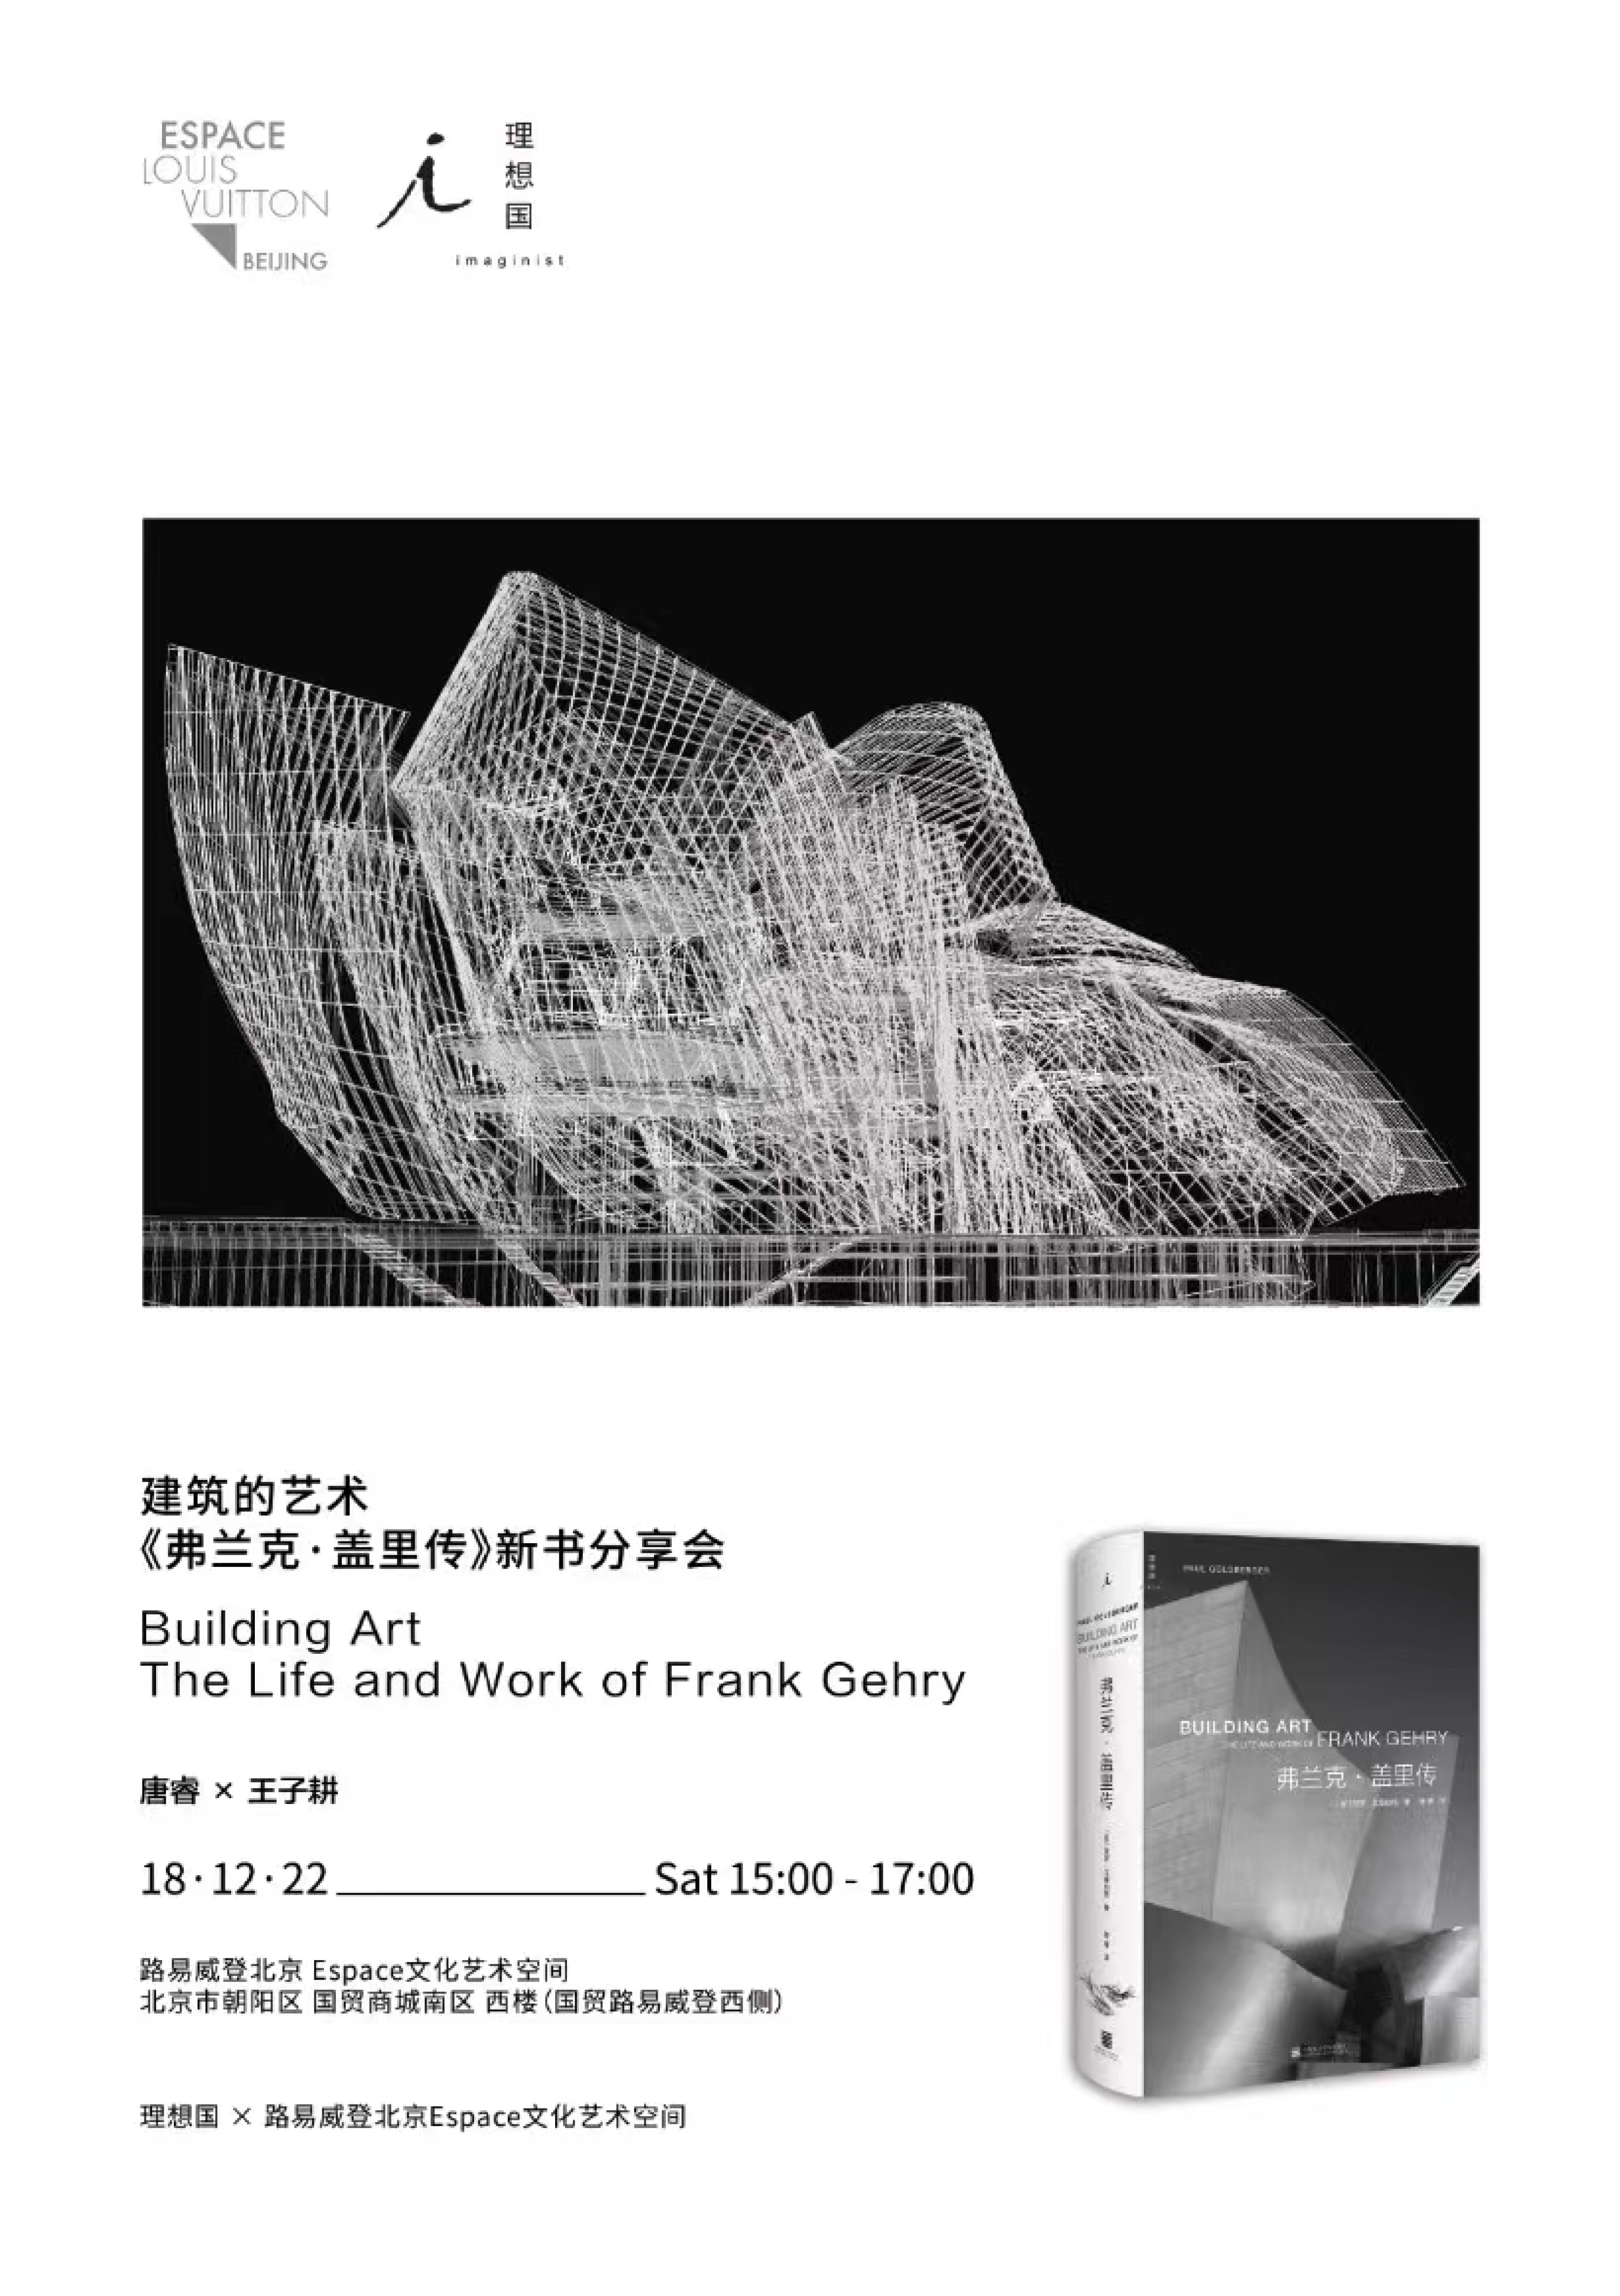 The Book Launch Event of “The Life and Work of Frank Gehry” was Held in the Louis Vuitton Beijing Cultural and Art Space, and Zigeng Wang was Invited as a Guest Speaker for the Conversation